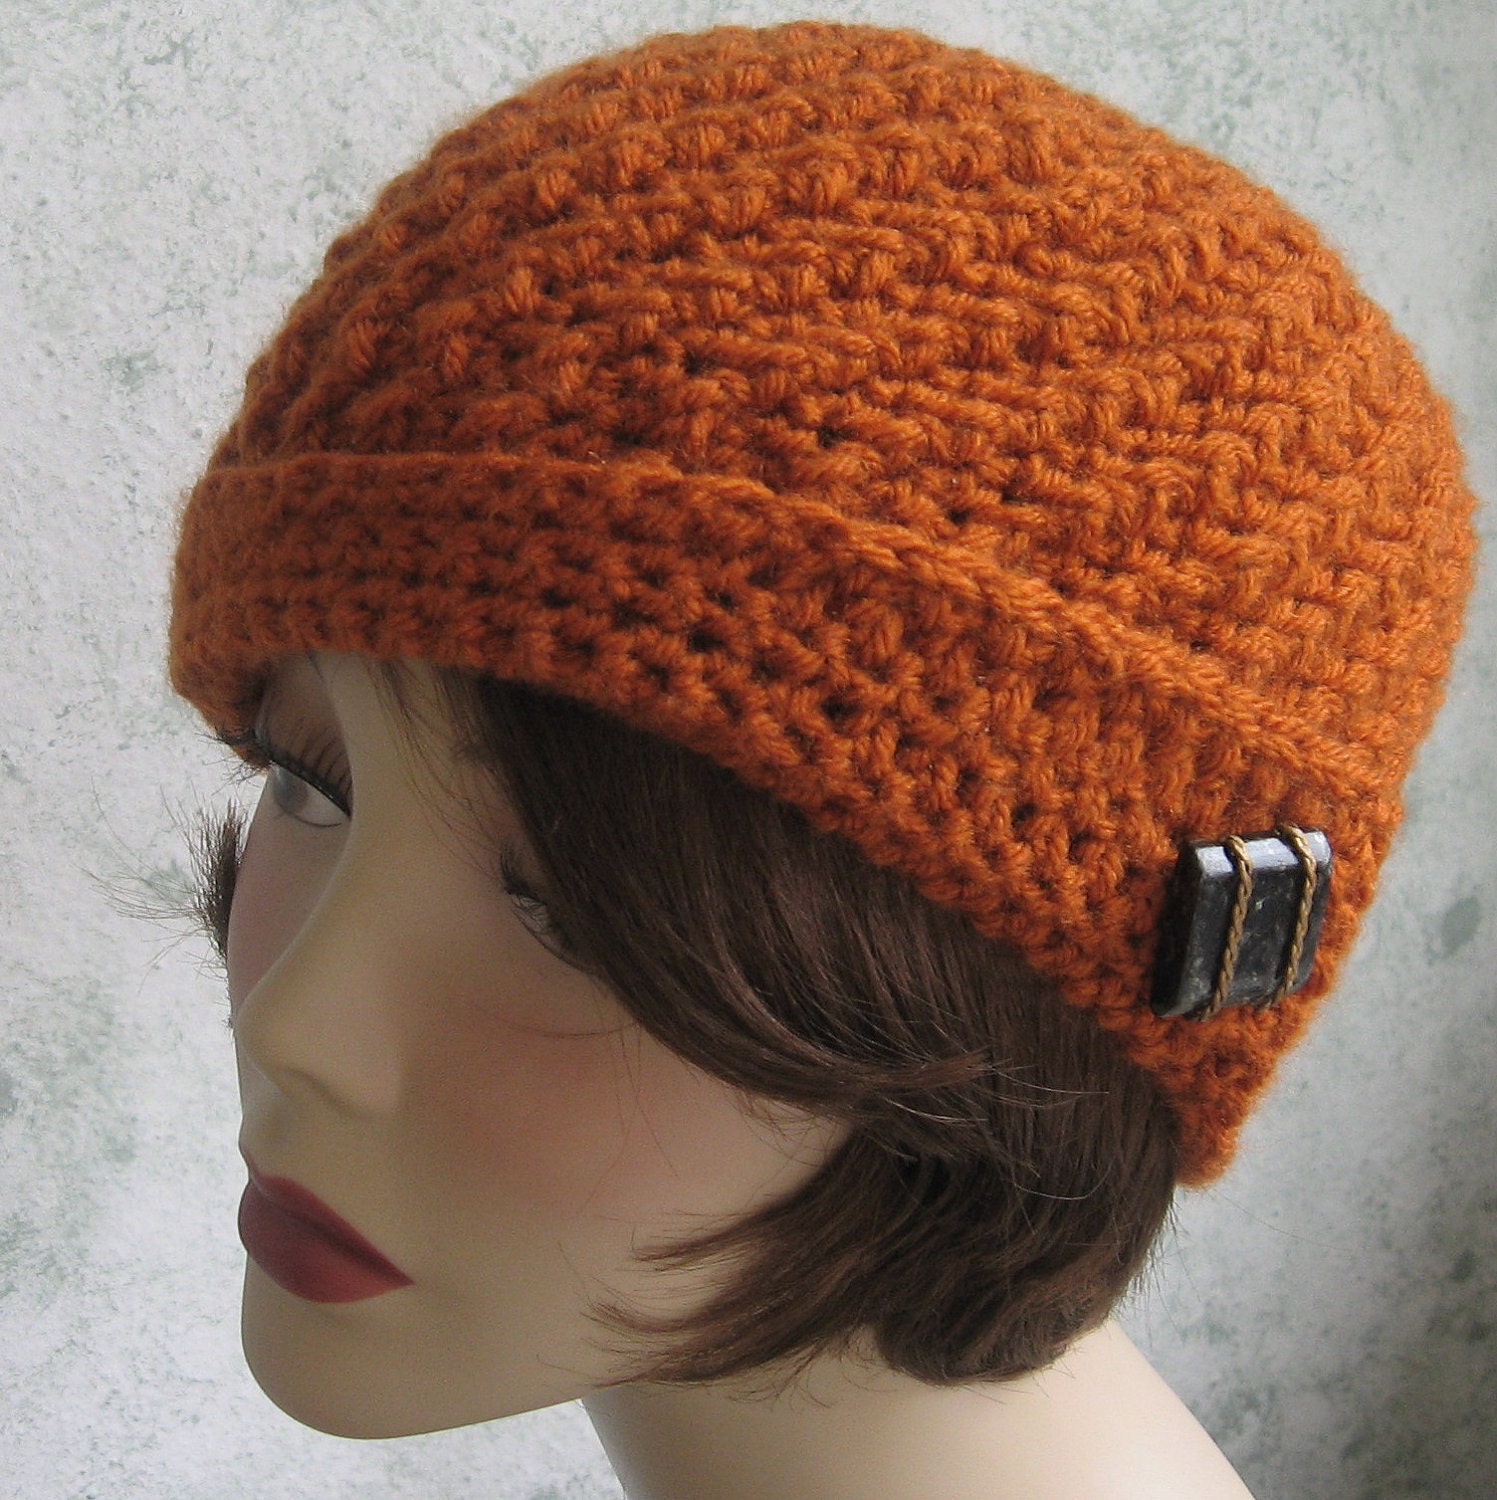 Crochet HAT PATTERN- Spiral Rib With Flapper Style Brim  PDF Easy To Make- Resell finished